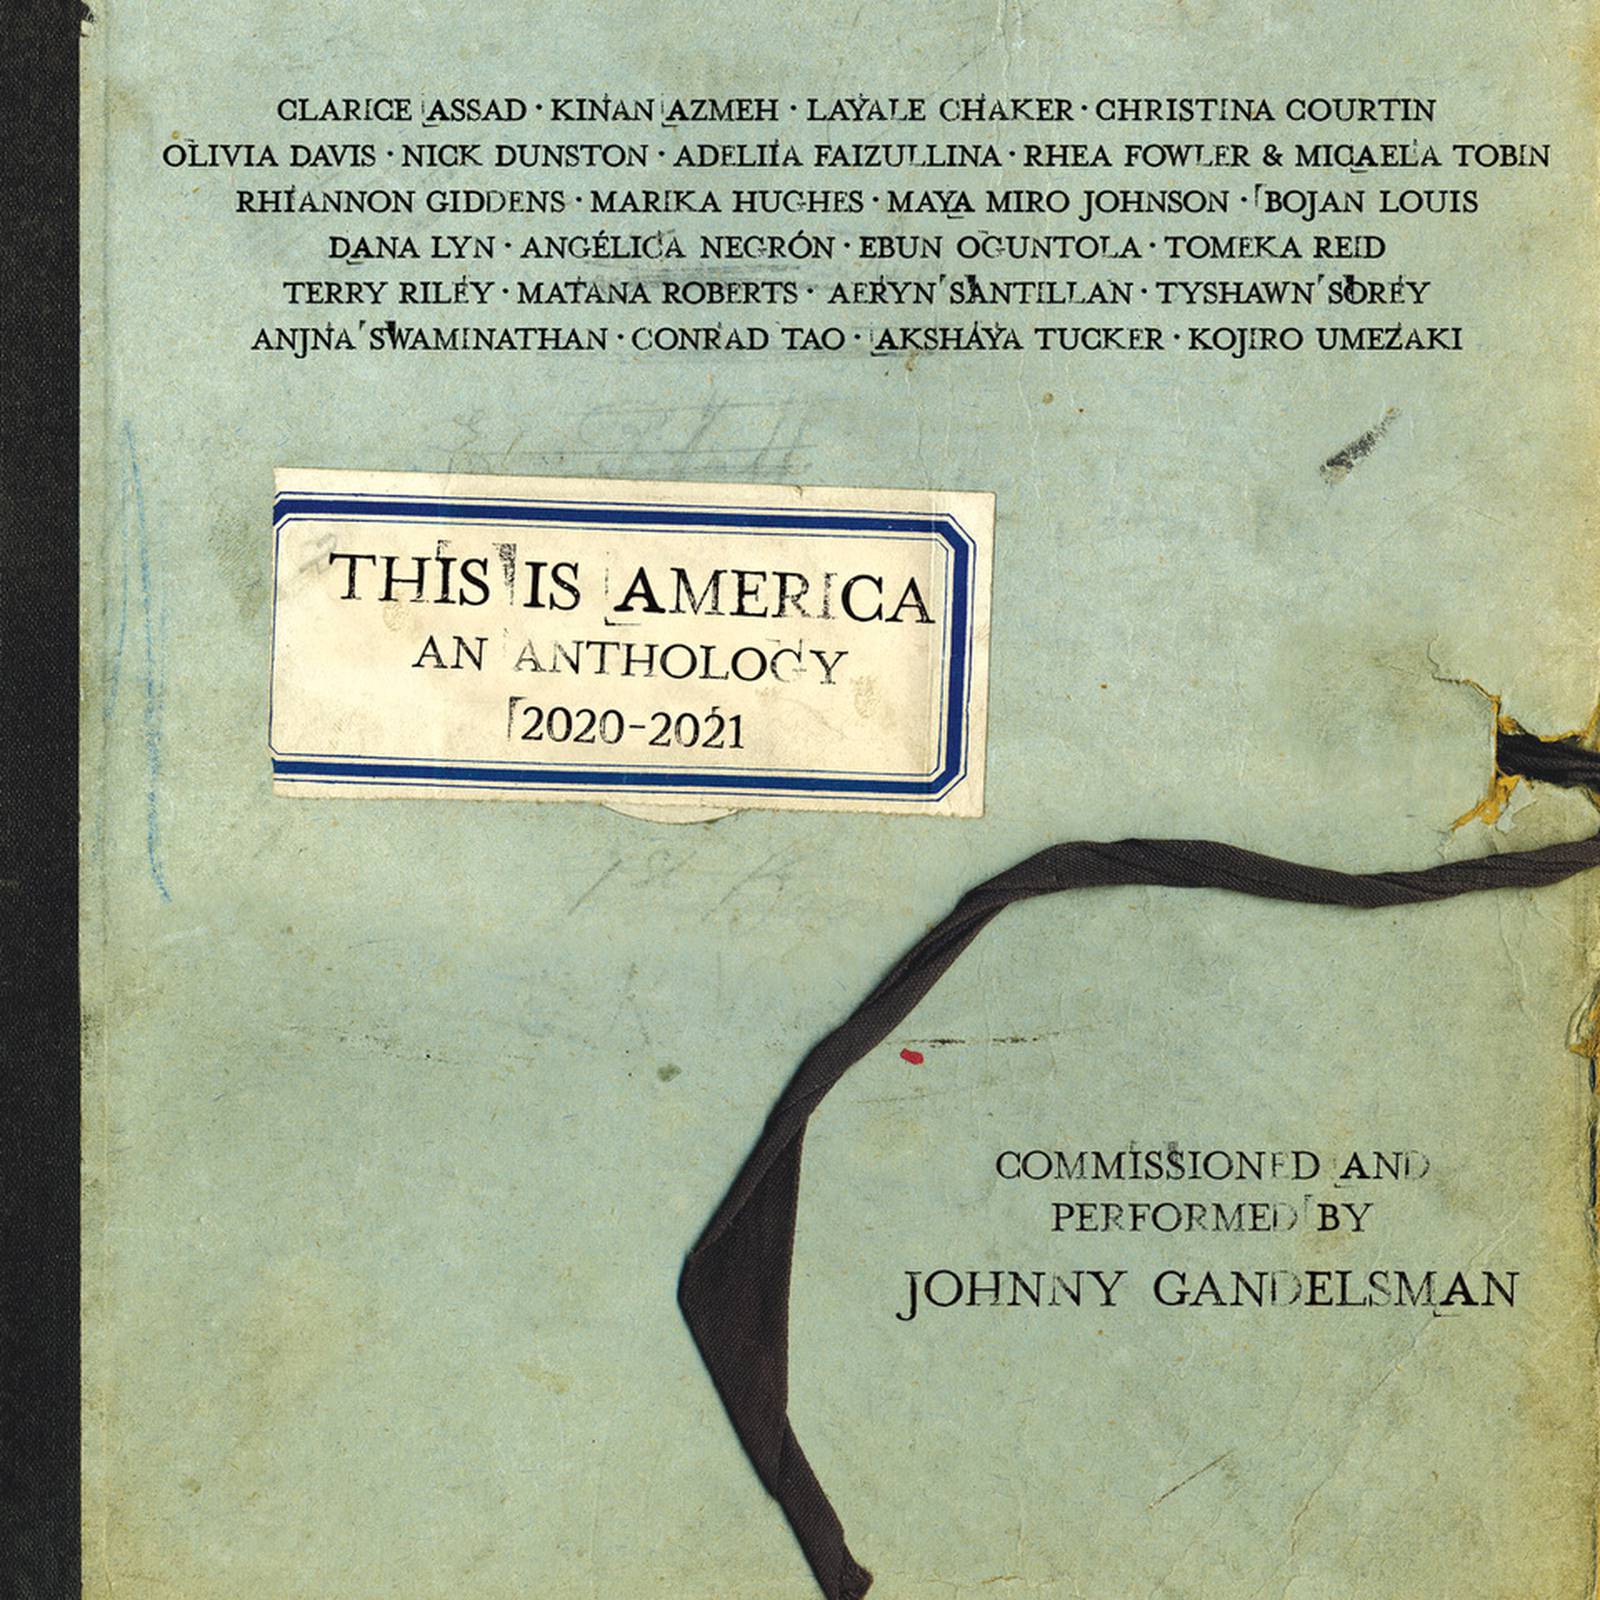 Cover of Johnny Gandelsman's album This is America featuring a green/grey matt cover, an anthology commissioned and performed by Johnny Gandelsman